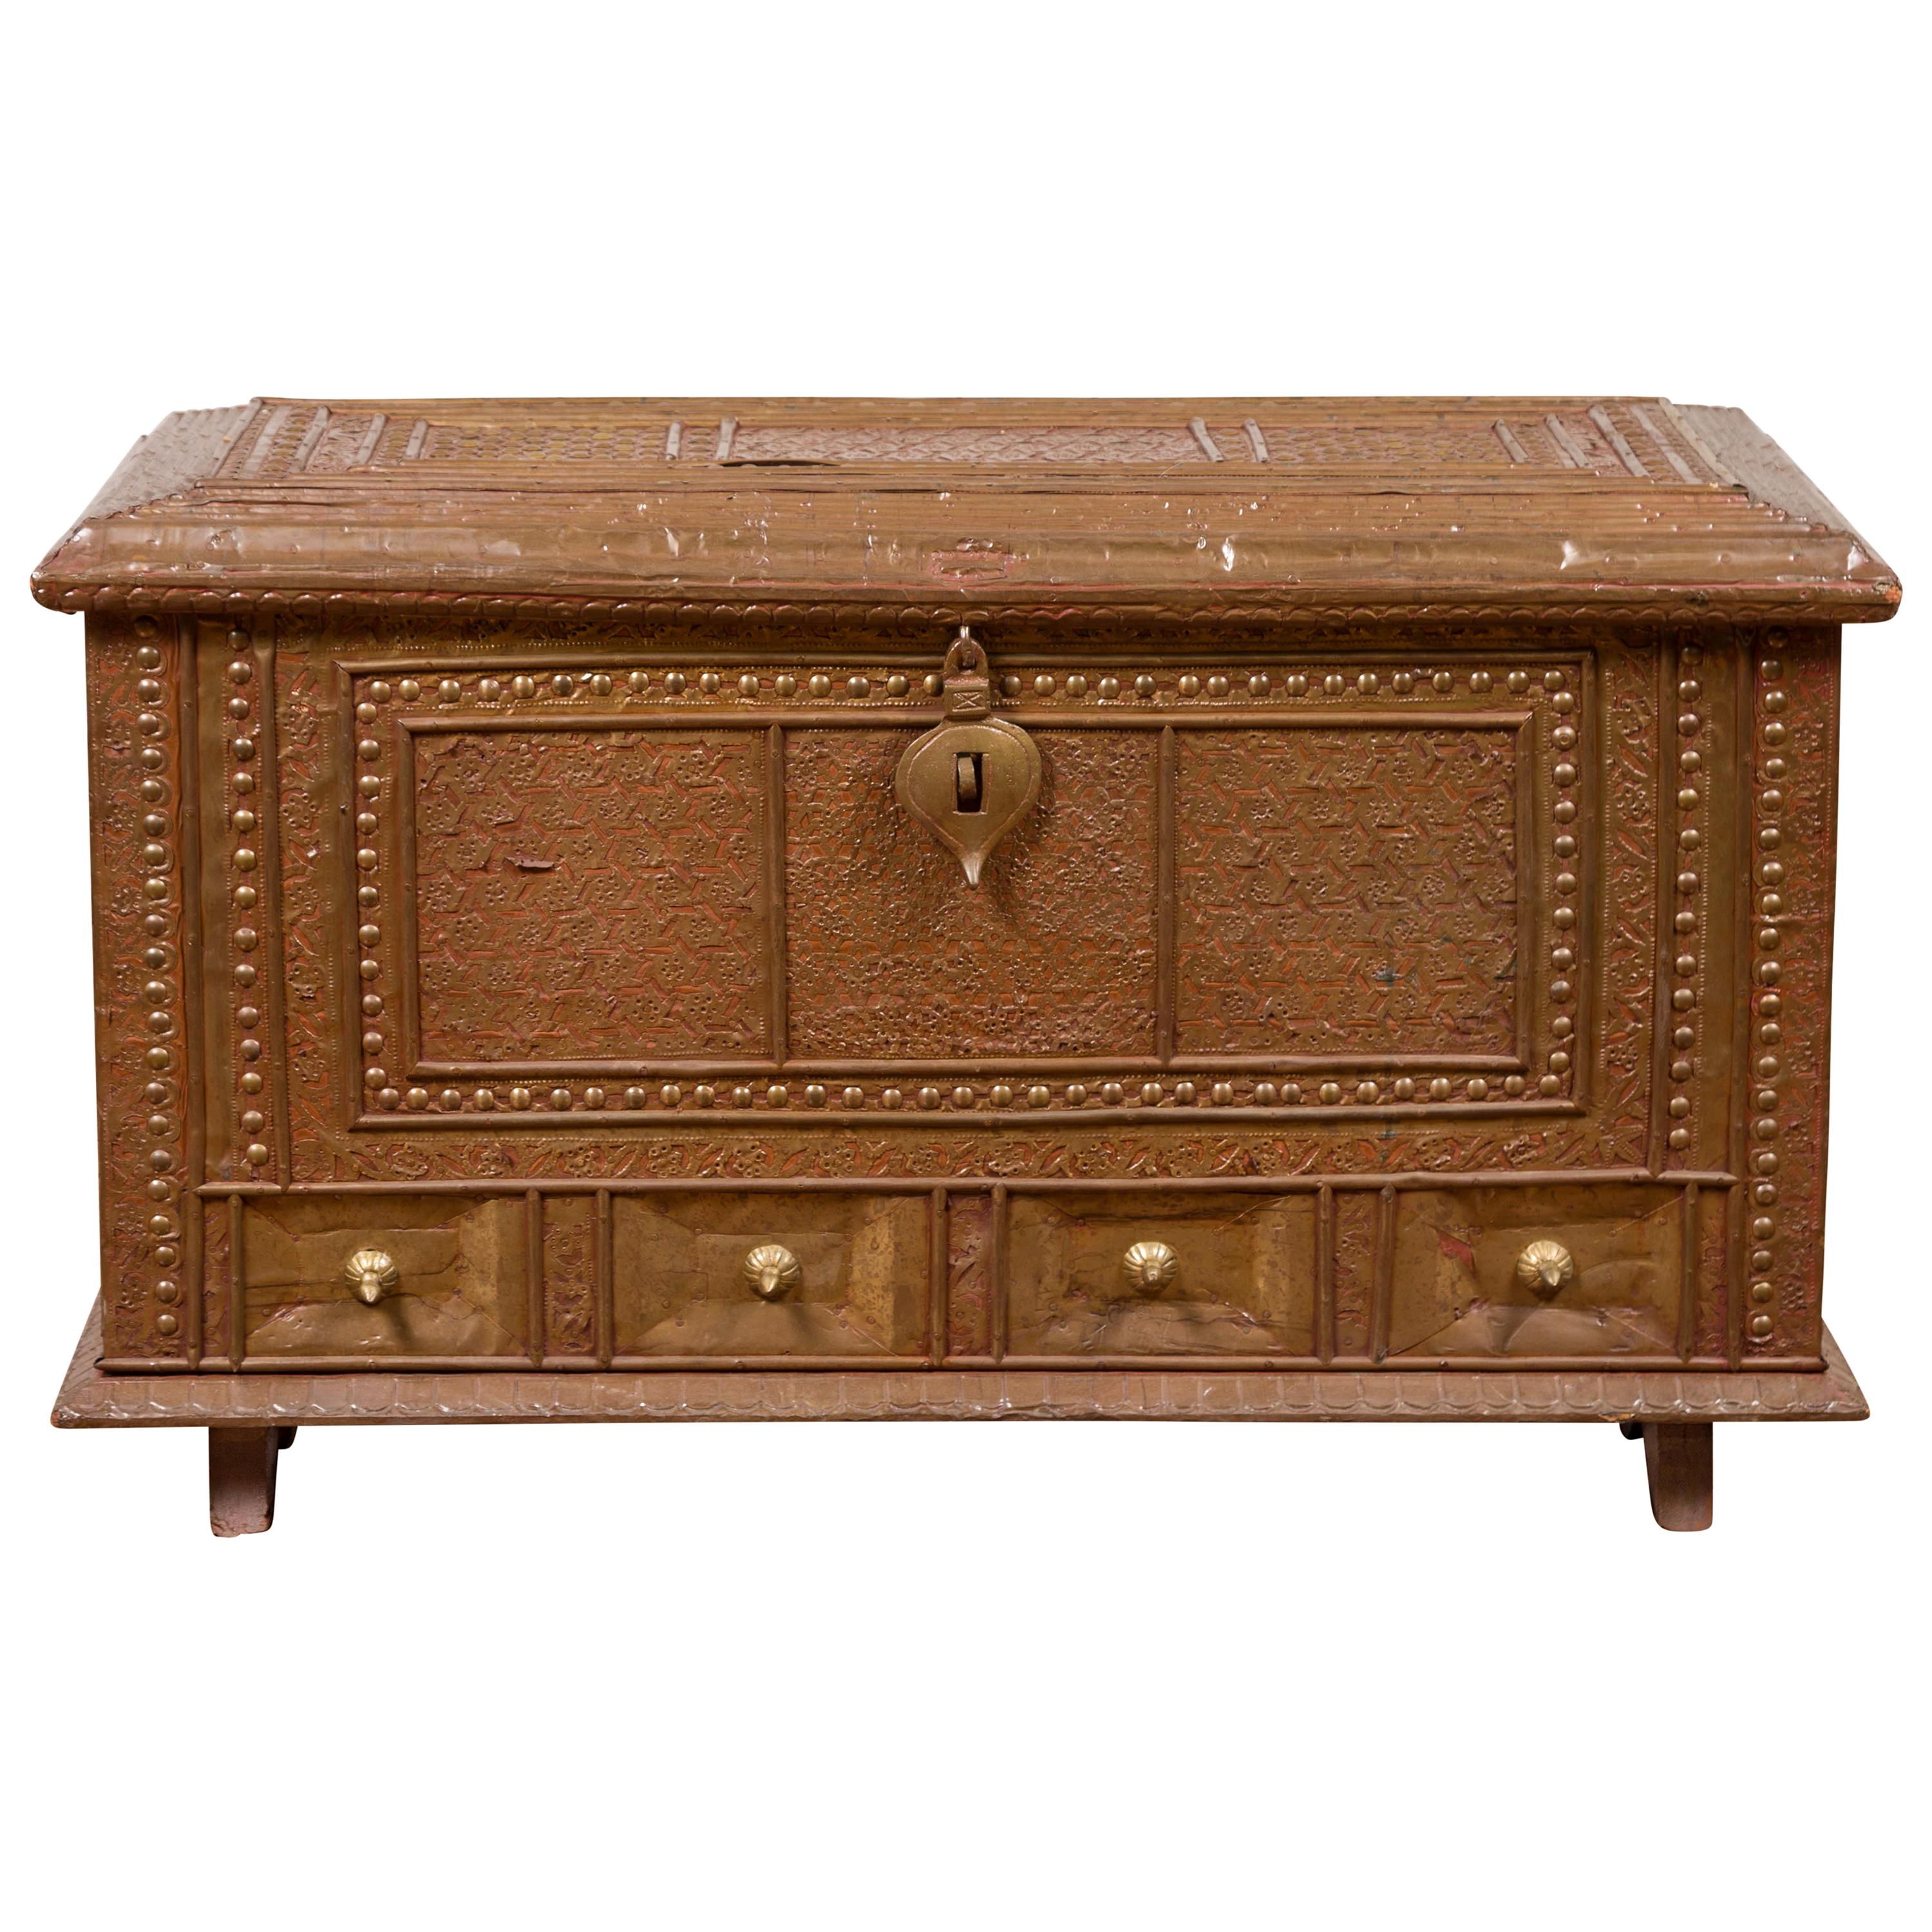 Antique Indian Blanket Chest with Bronze Sheathing, Geometric Patterns and Studs For Sale